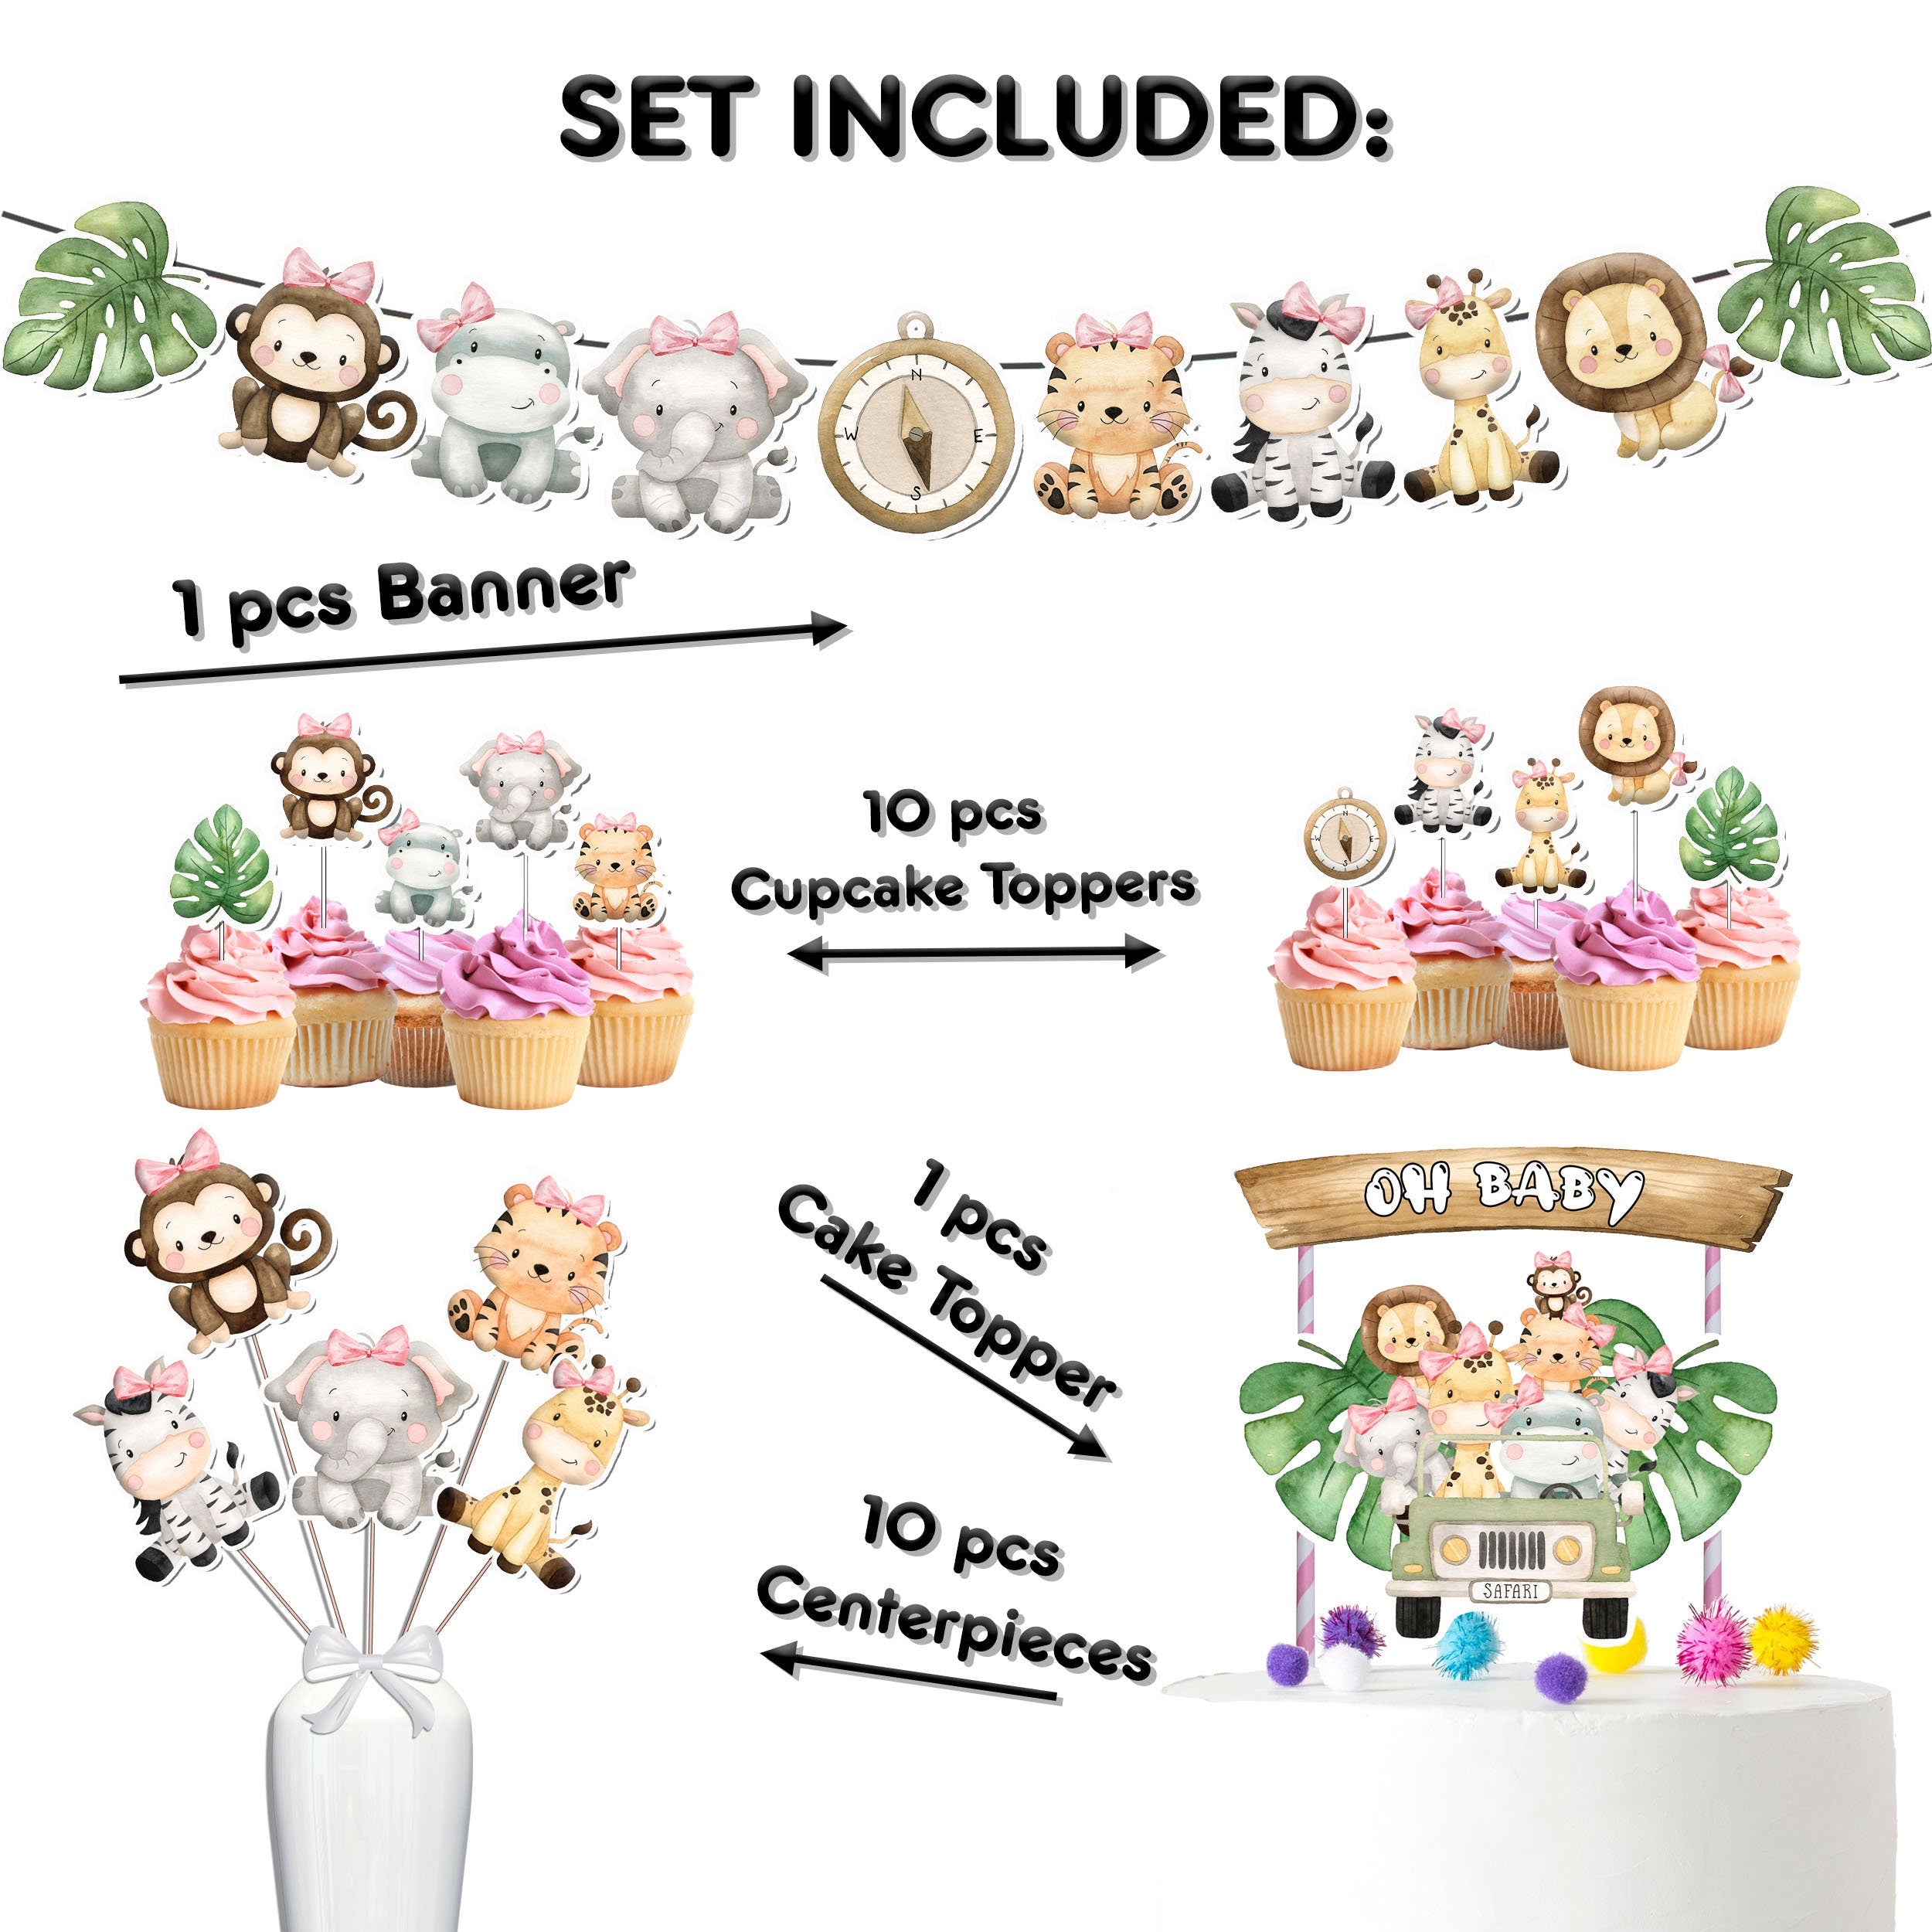 Jungle Animals Party Decoration Set for Baby Shower & Birthday - Banner, Cake & Cupcake Toppers, Centerpieces